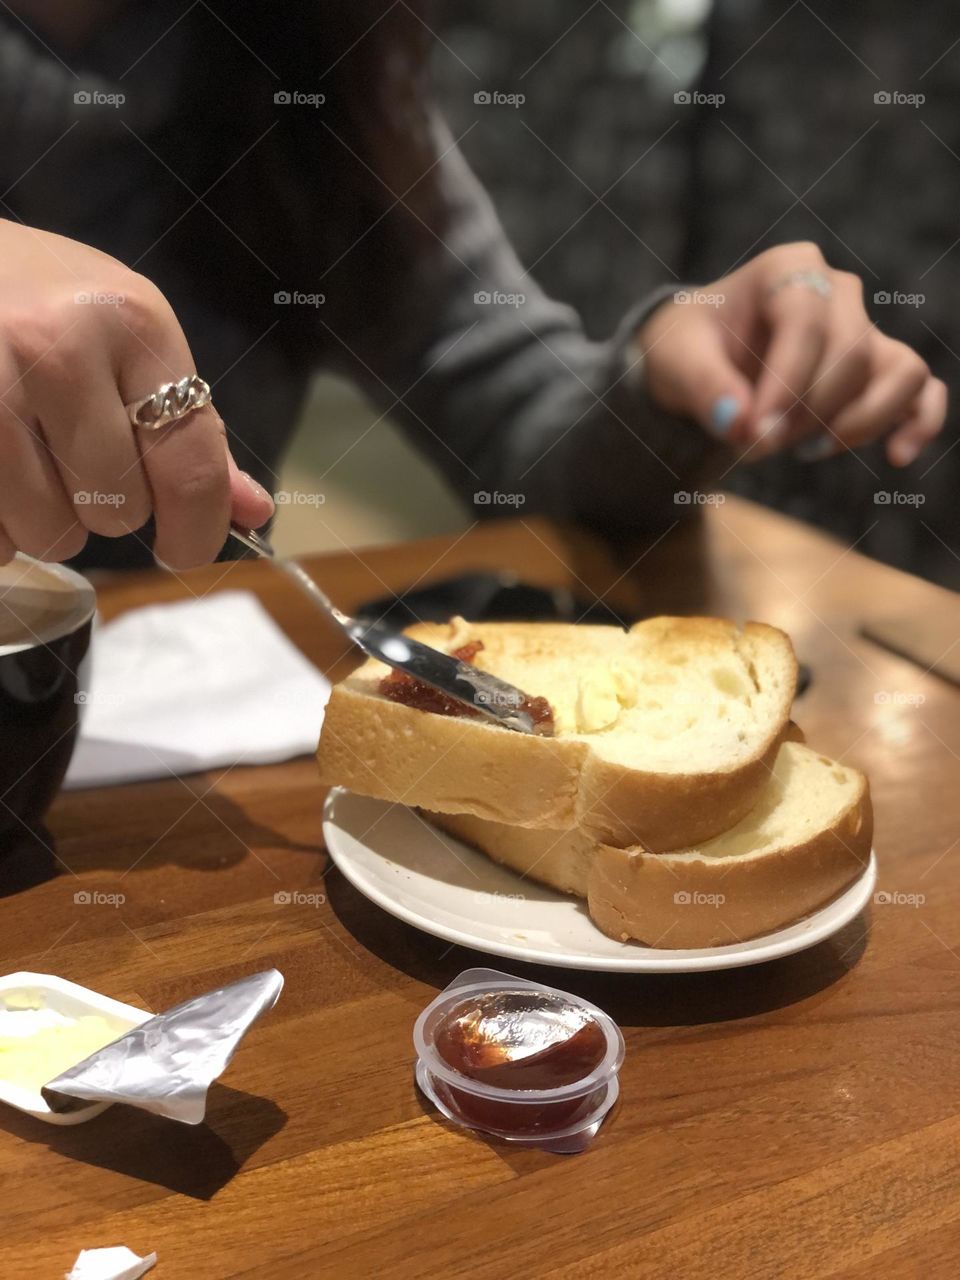 Hand spreading jam and butter on a toast